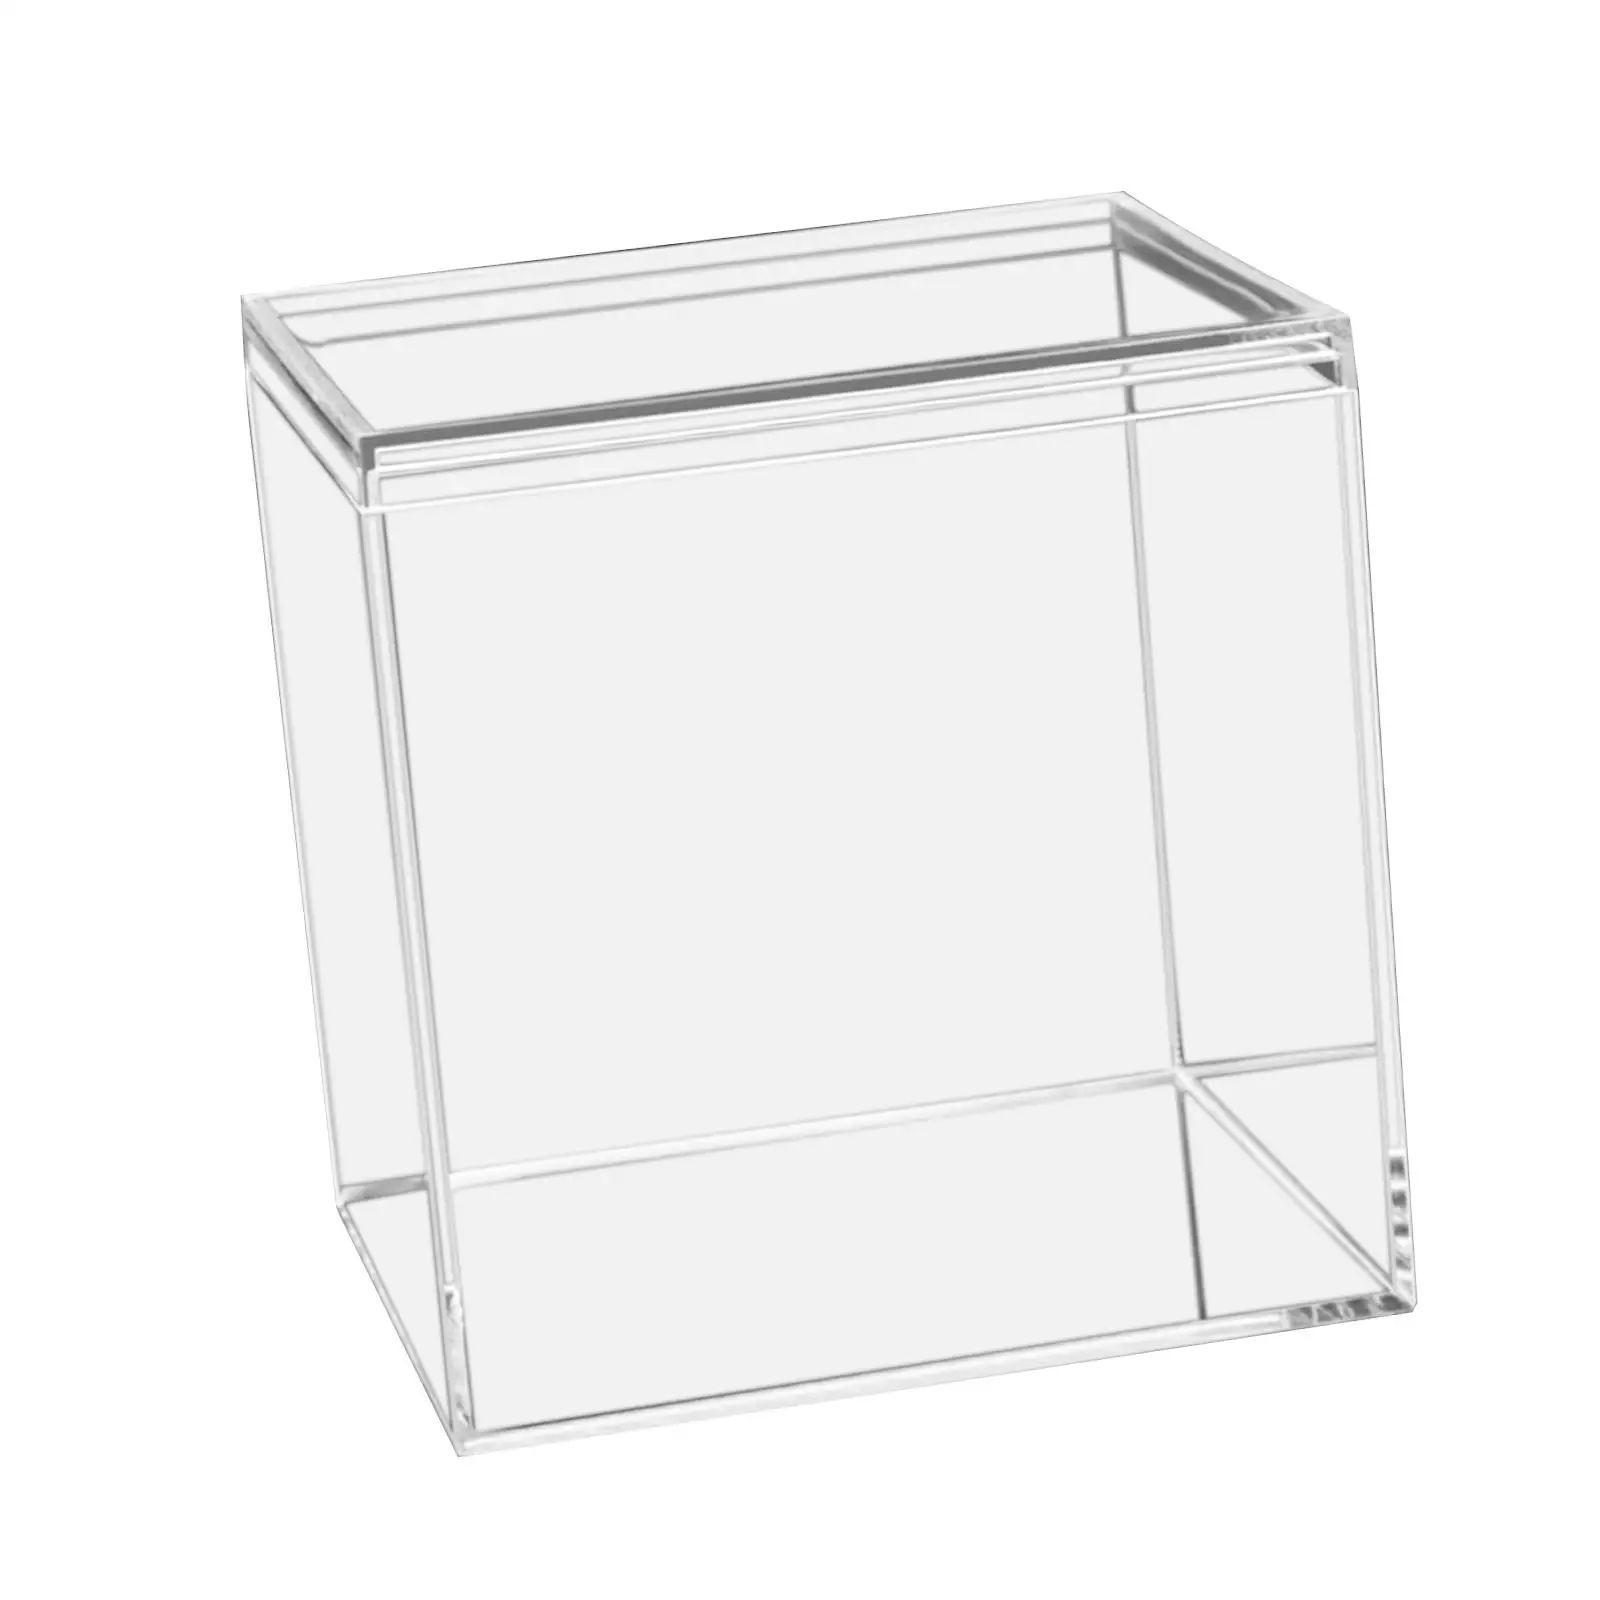 Waterproof  Showcase, Clear Acrylic  Display, Square Containers, for Weddings